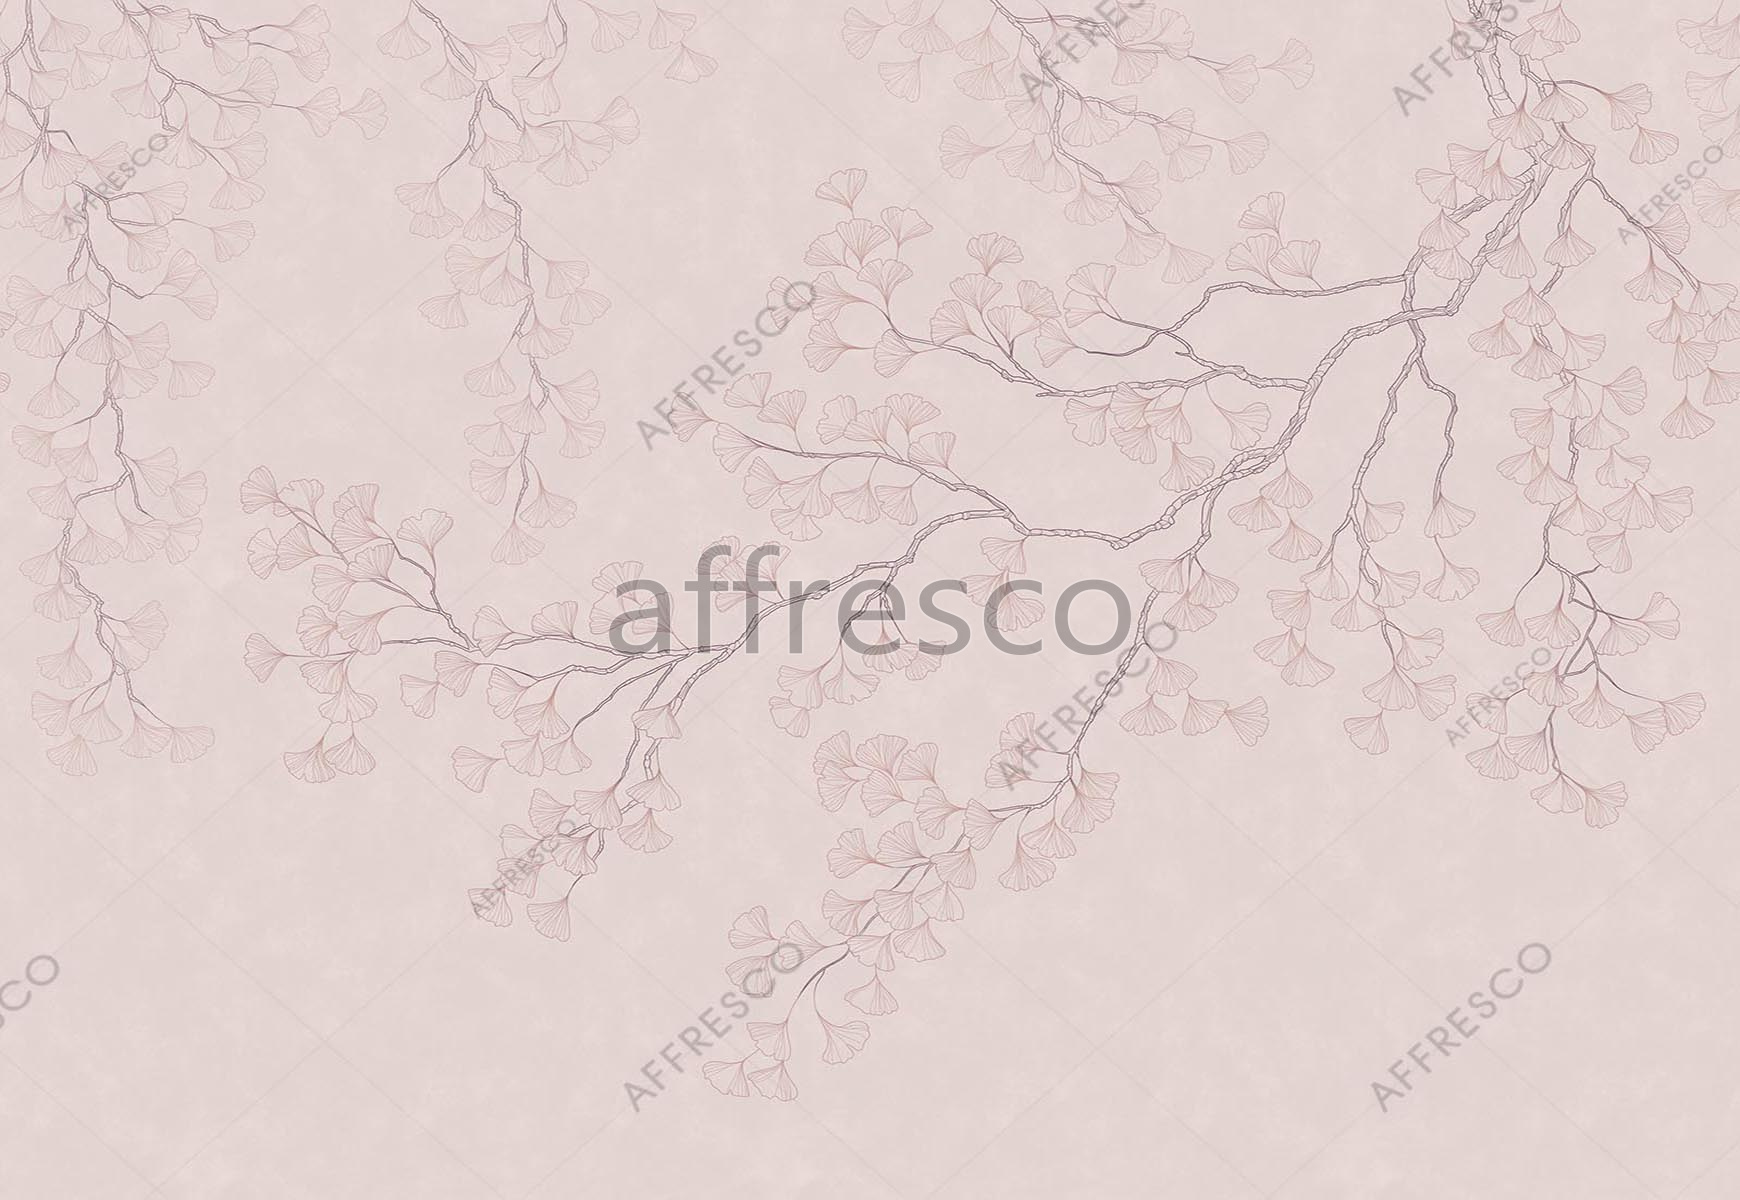 ID139152 | Forest | Eastern Riddle | Affresco Factory